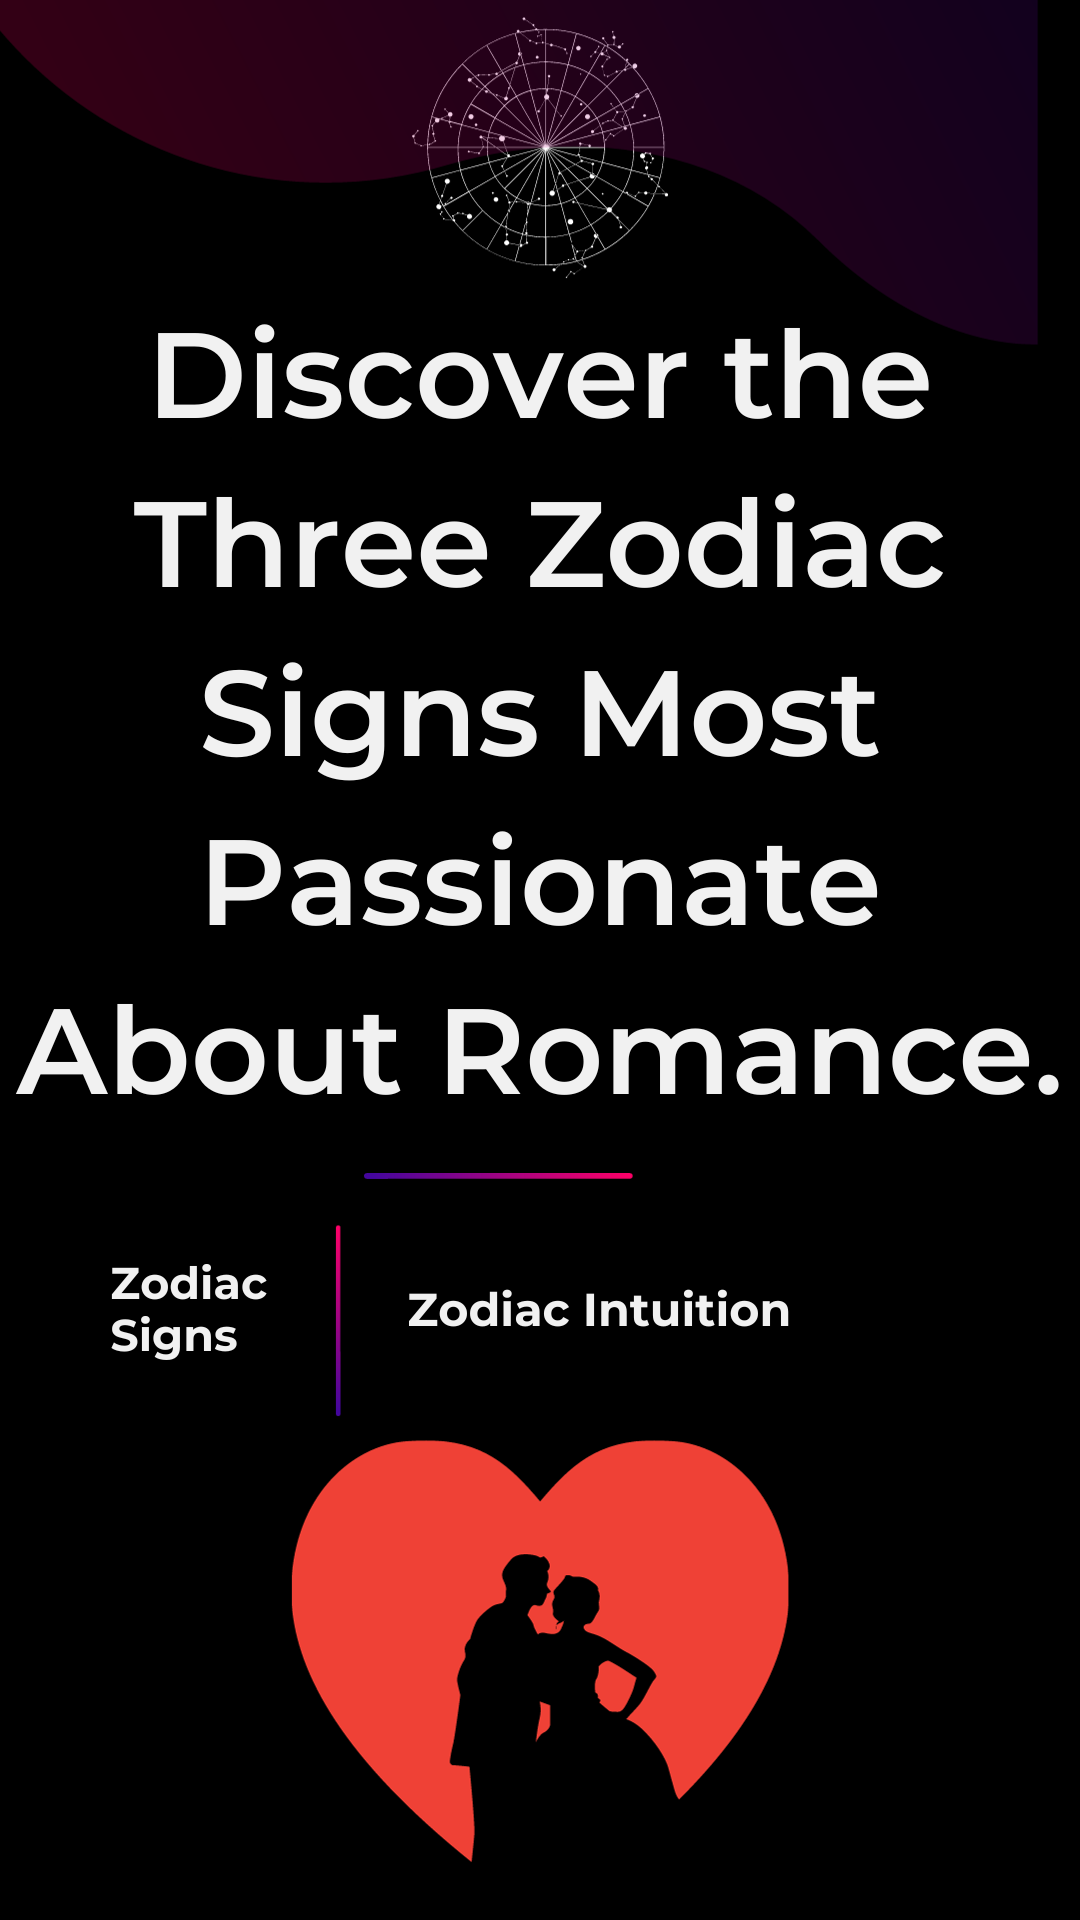 Discover the Three Zodiac Signs Most Passionate About Romance.